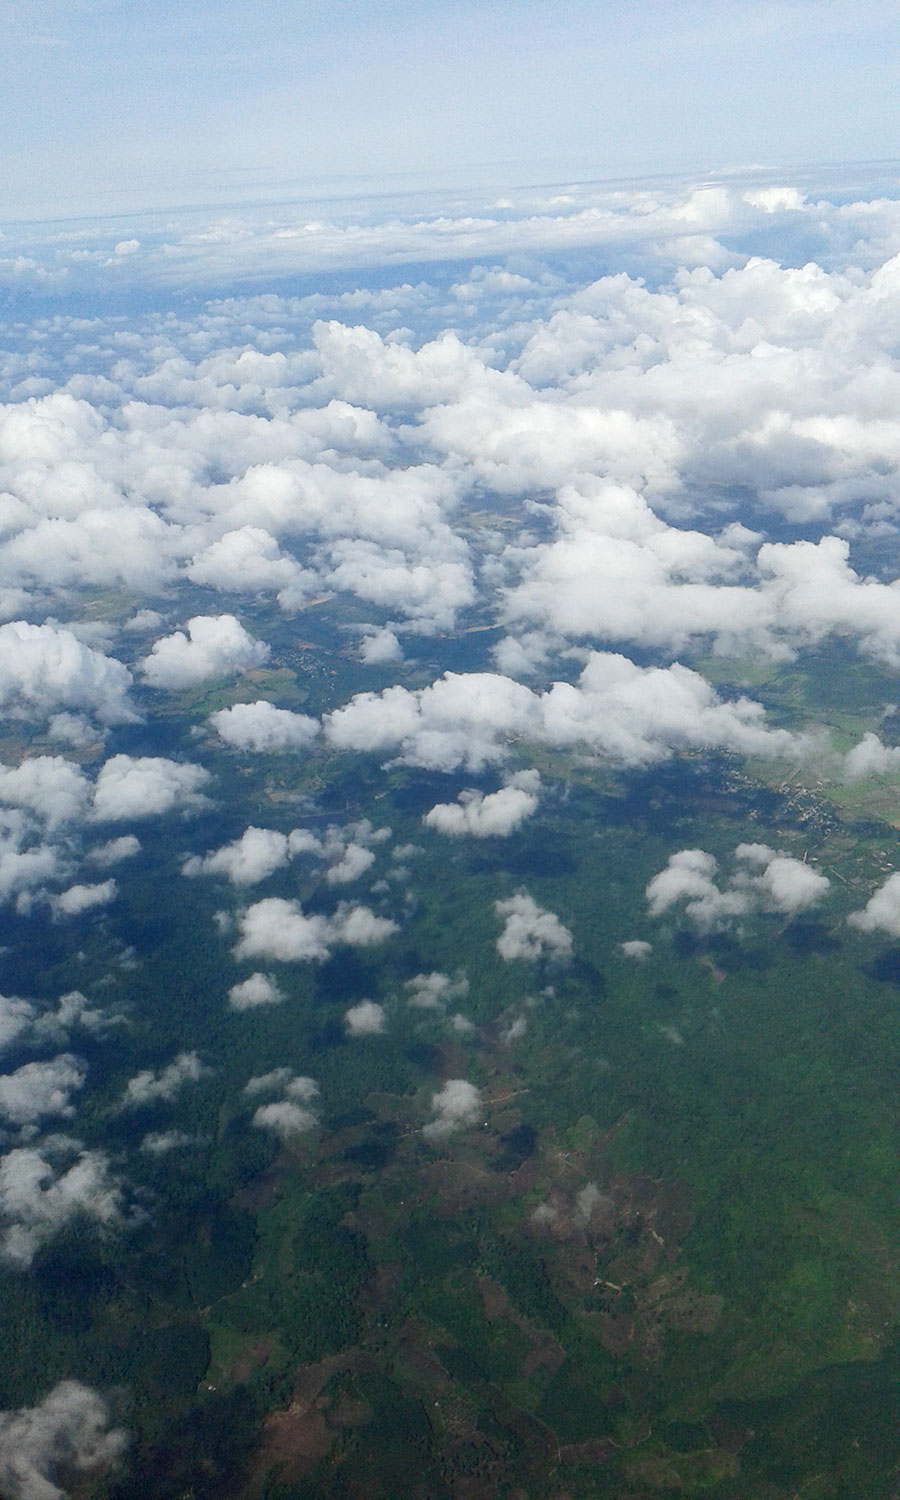 looking down at SE Asia from an airplane